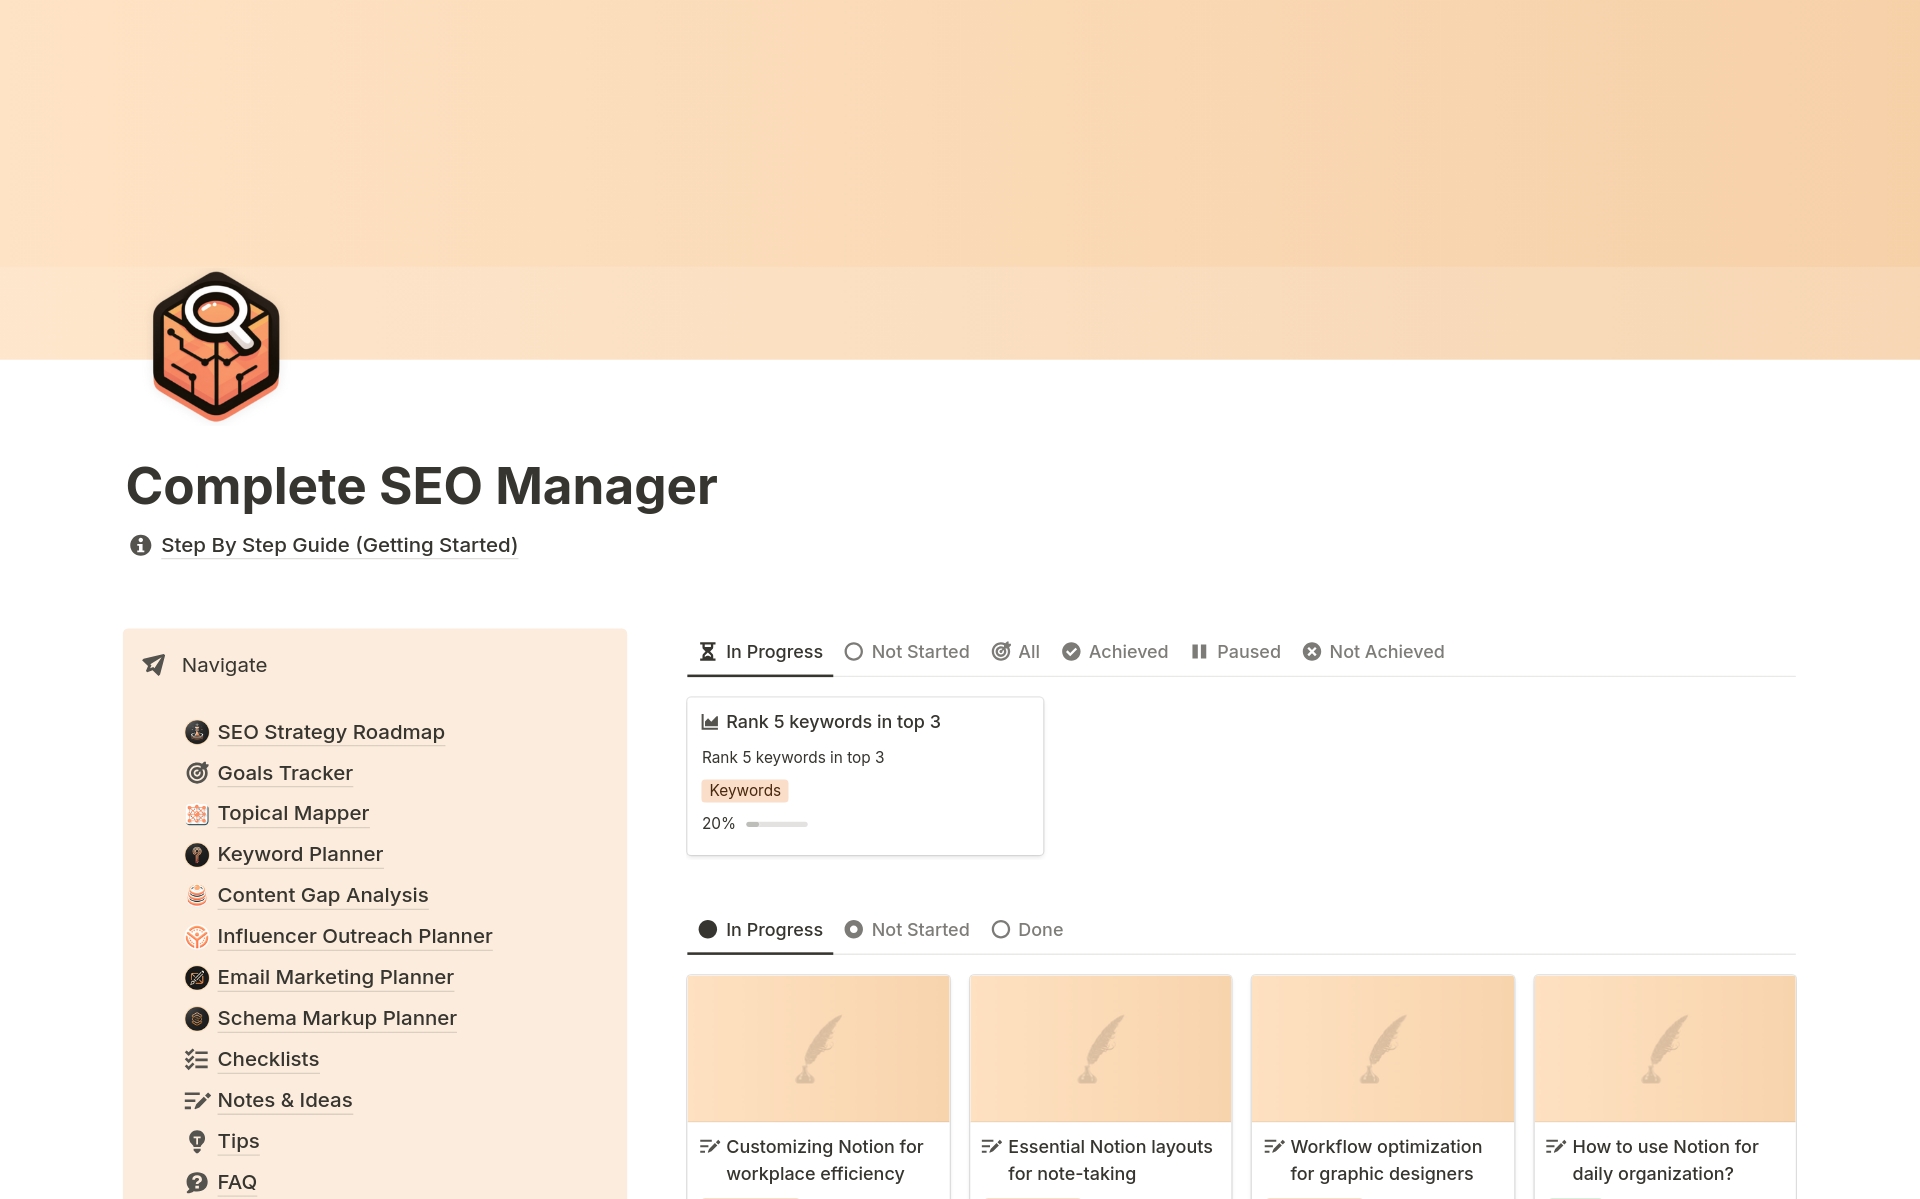 Complete SEO Manager: A holistic Notion template designed for SEO professionals and enthusiasts.